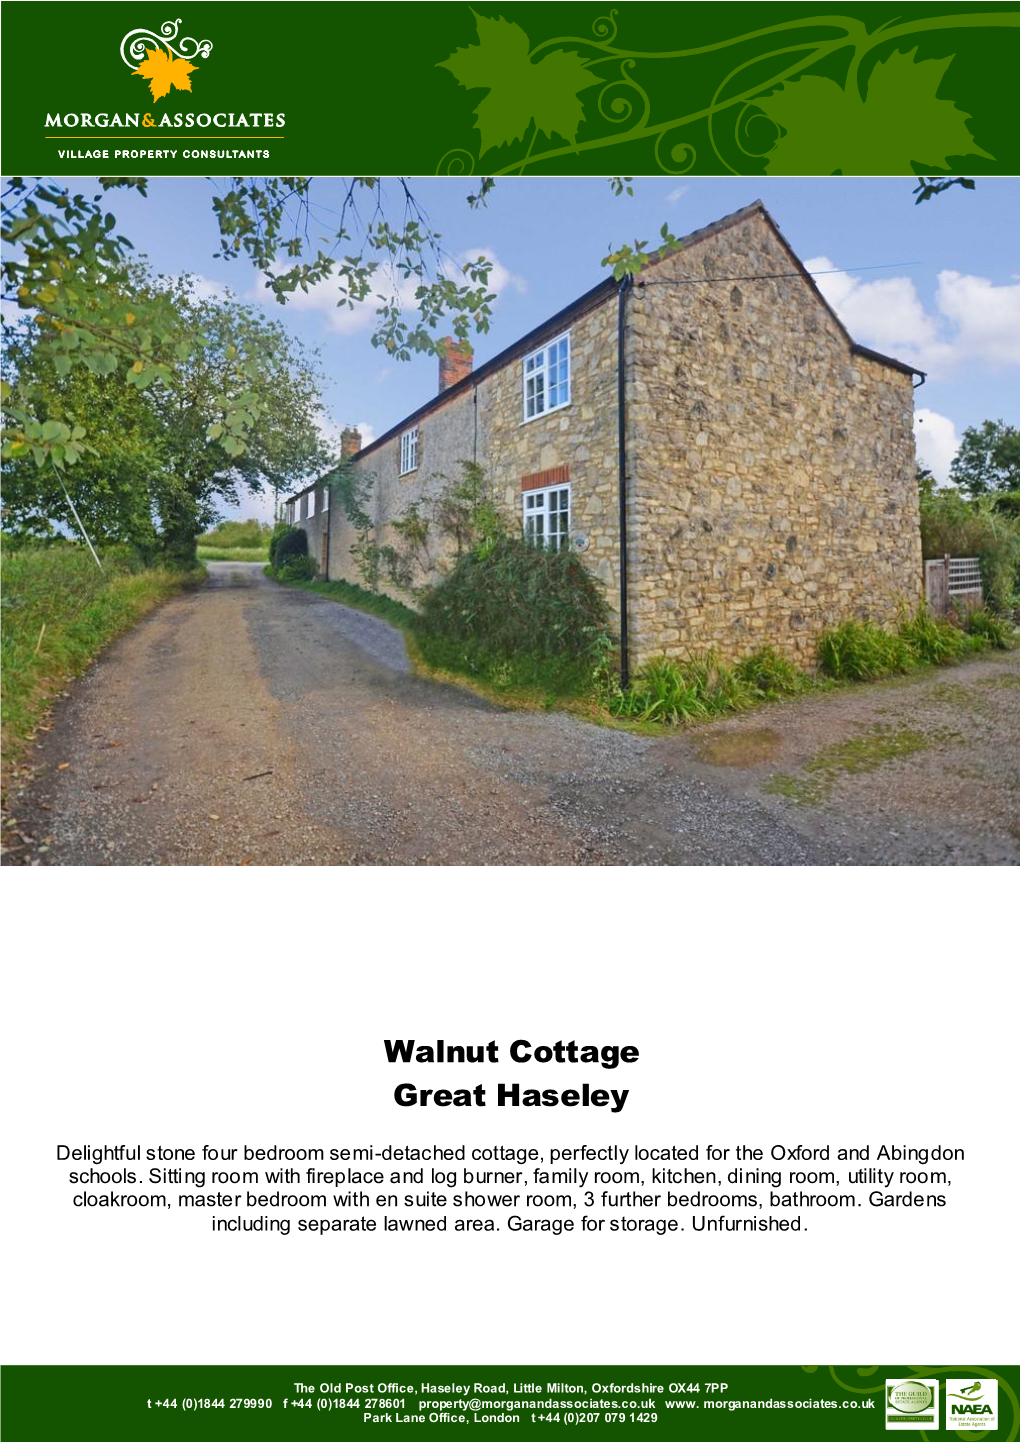 Walnut Cottage Great Haseley